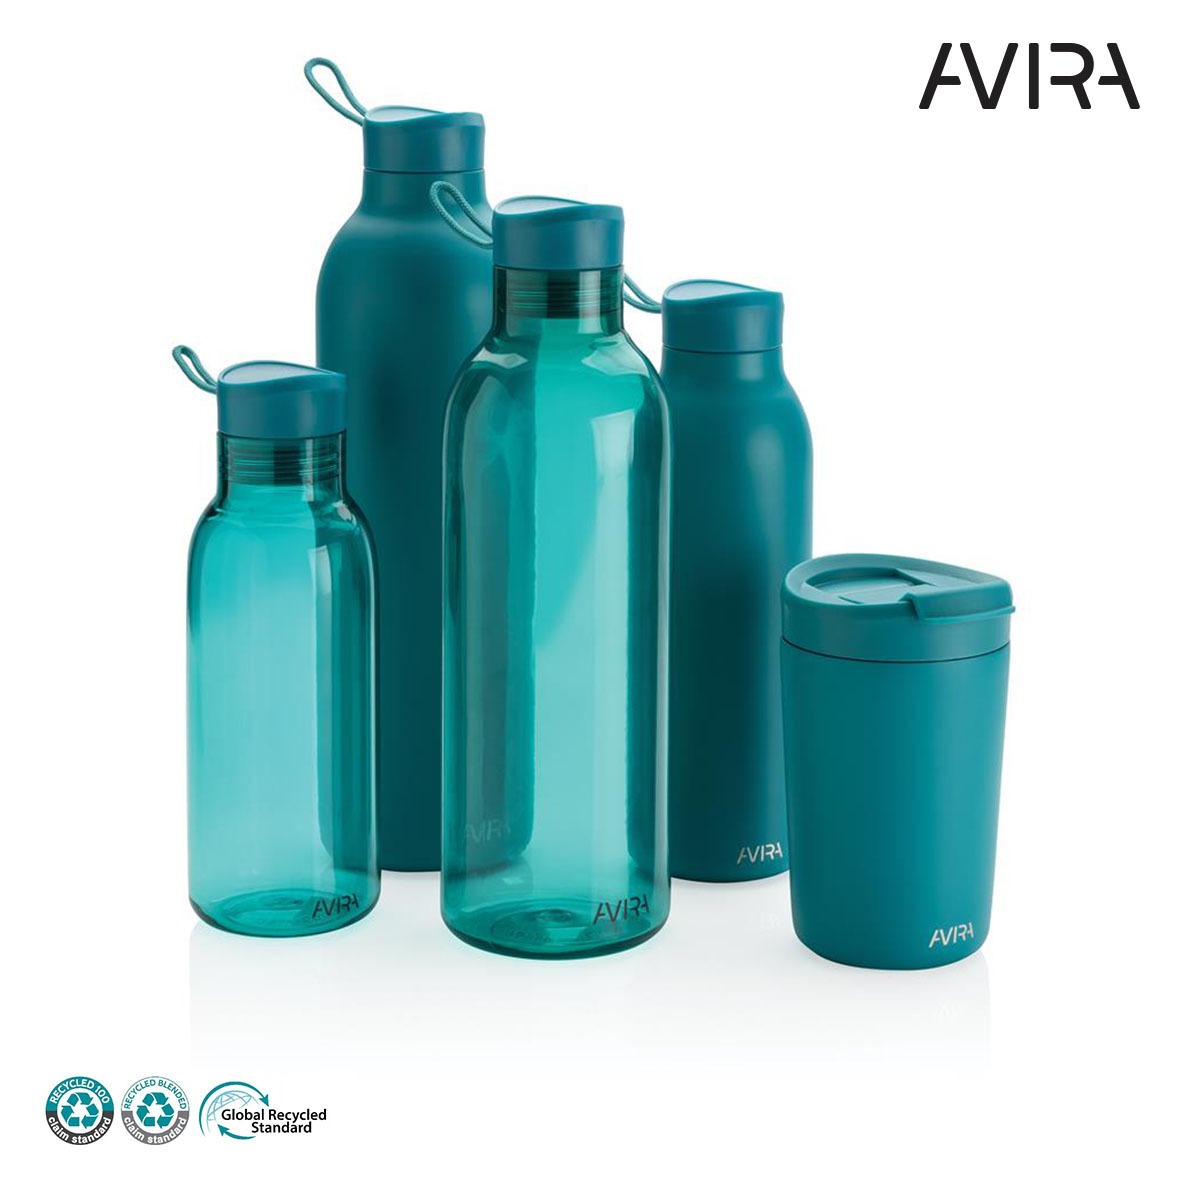 Bouteille d’eau rpet recycle personnalise avira-turquoise